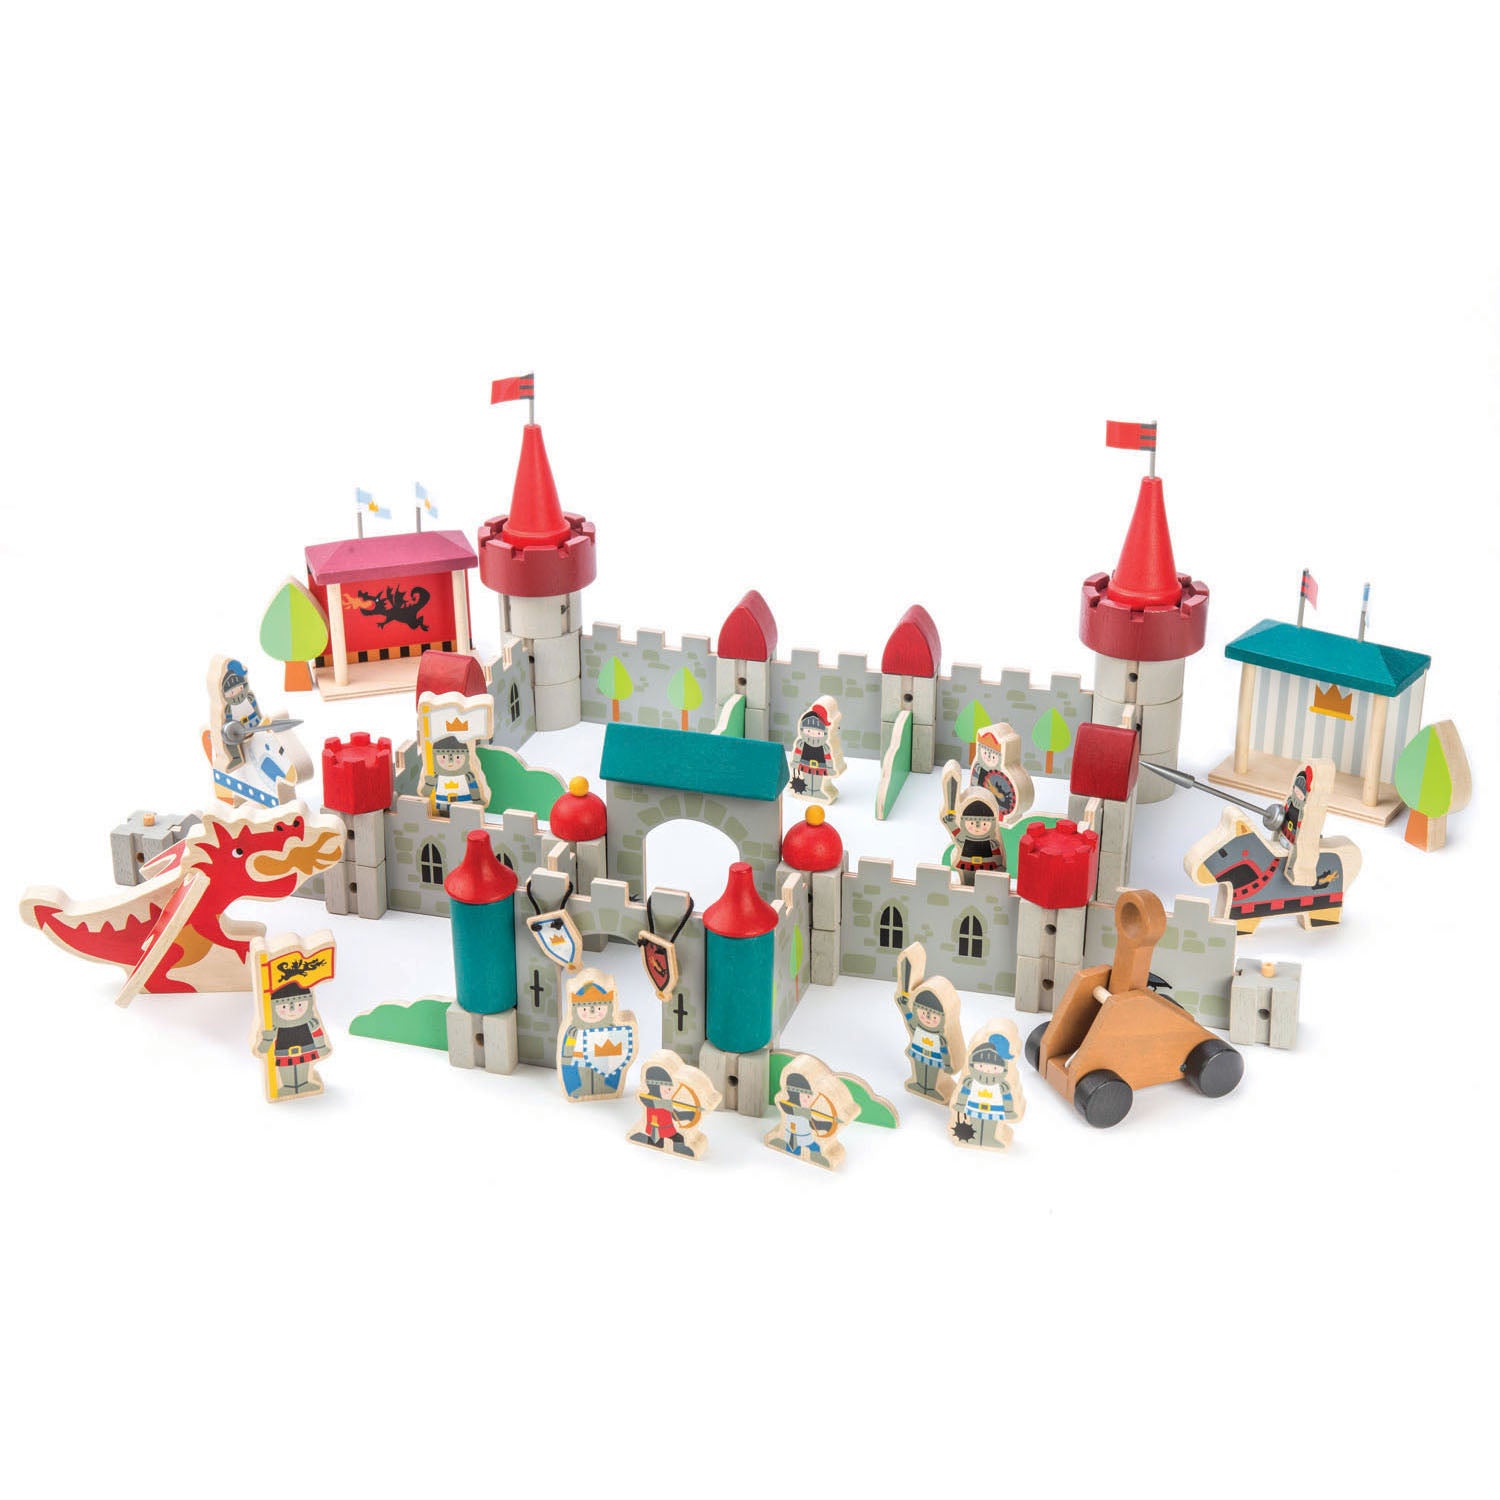 <p>Be the king of Royal Castle! The Magnificent Royal Castle features red and blue soldiers with different postures, heraldic shields and spears, 2 jousting tents, horses to sit on, trees, a fire dragon and a working trebuchet. This comprehensive and luxury size set has all you need to create and build your own unique castle layout, by clipping together walls and posts with small neat plastic pegs.</p>
<p>Perfect to play with or add to our Wolf Castle and Dragon Castle.</p>
<p>Age range: 3 Years And Older  </p>
<p>Product size: 20.47&quot; x 16.14&quot; x 8.66&quot;  </p>
<p>Weight: 4.09 lbs</p>
